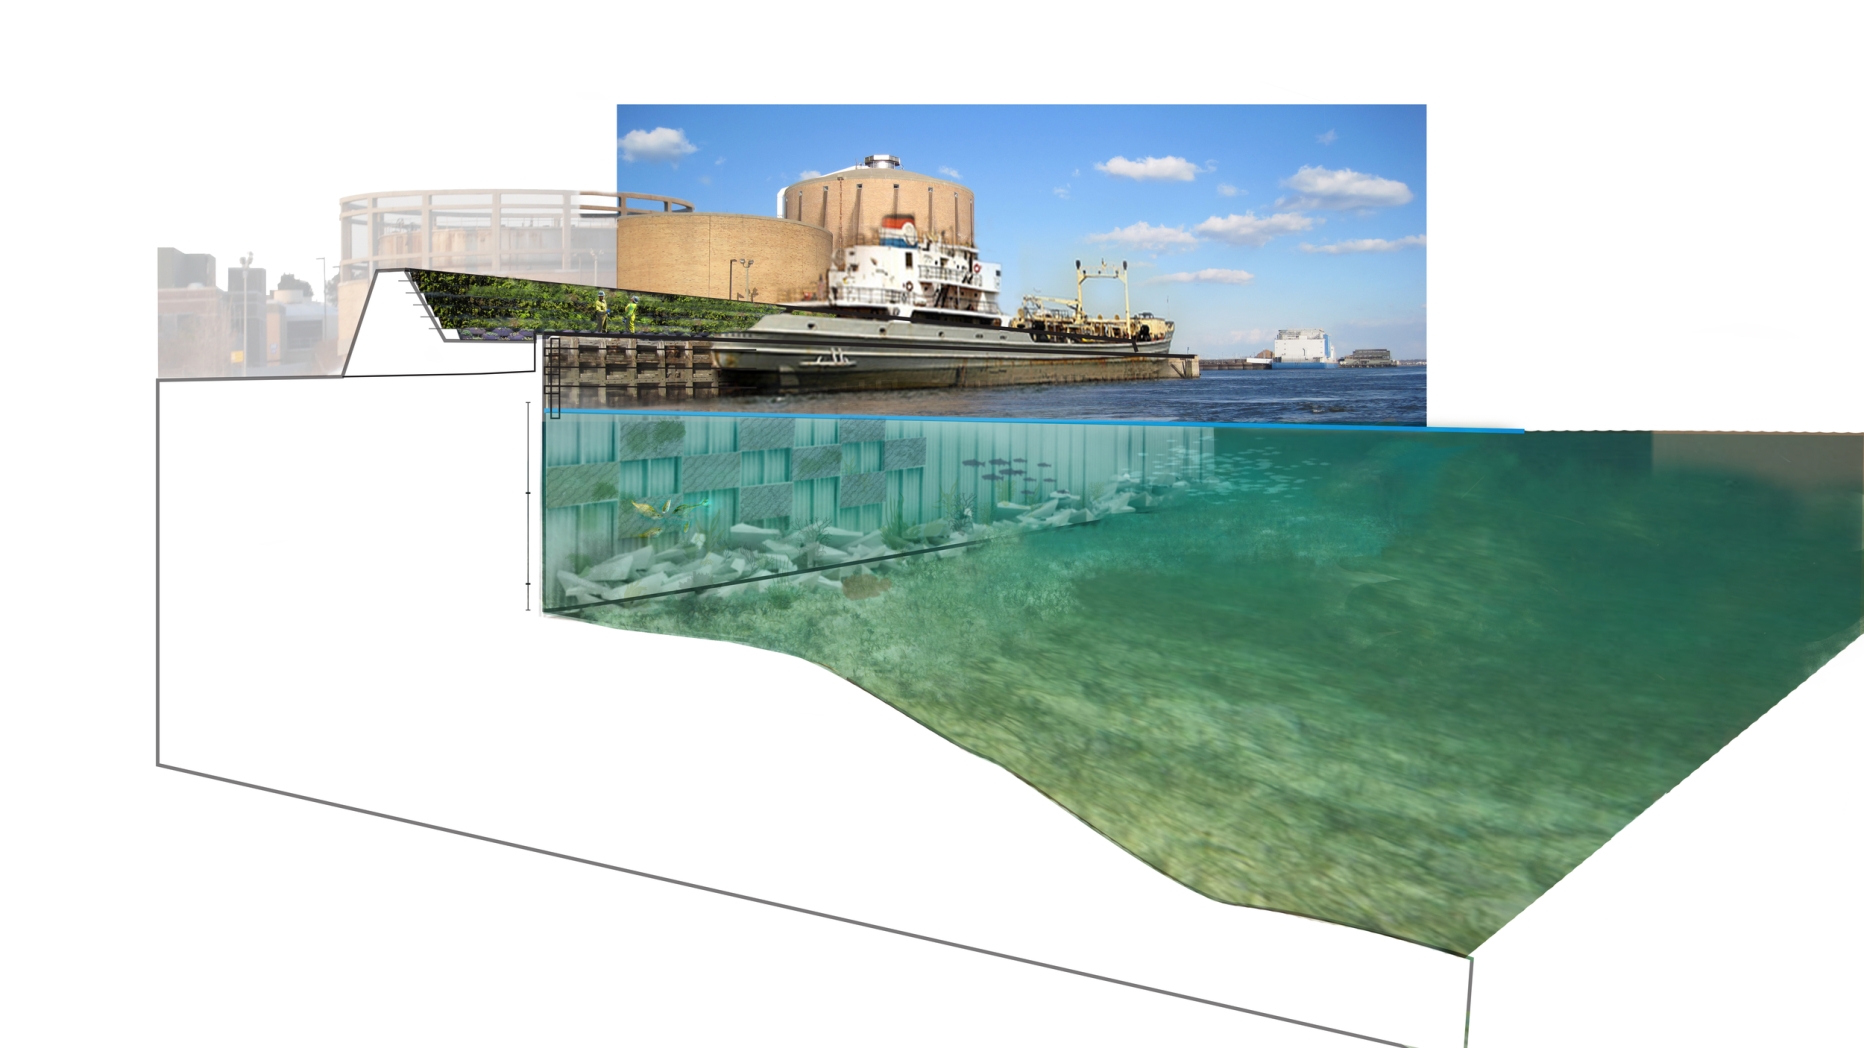 Rendering of multilevel flood walls with people walking on a river path and a ship anchored in the river.